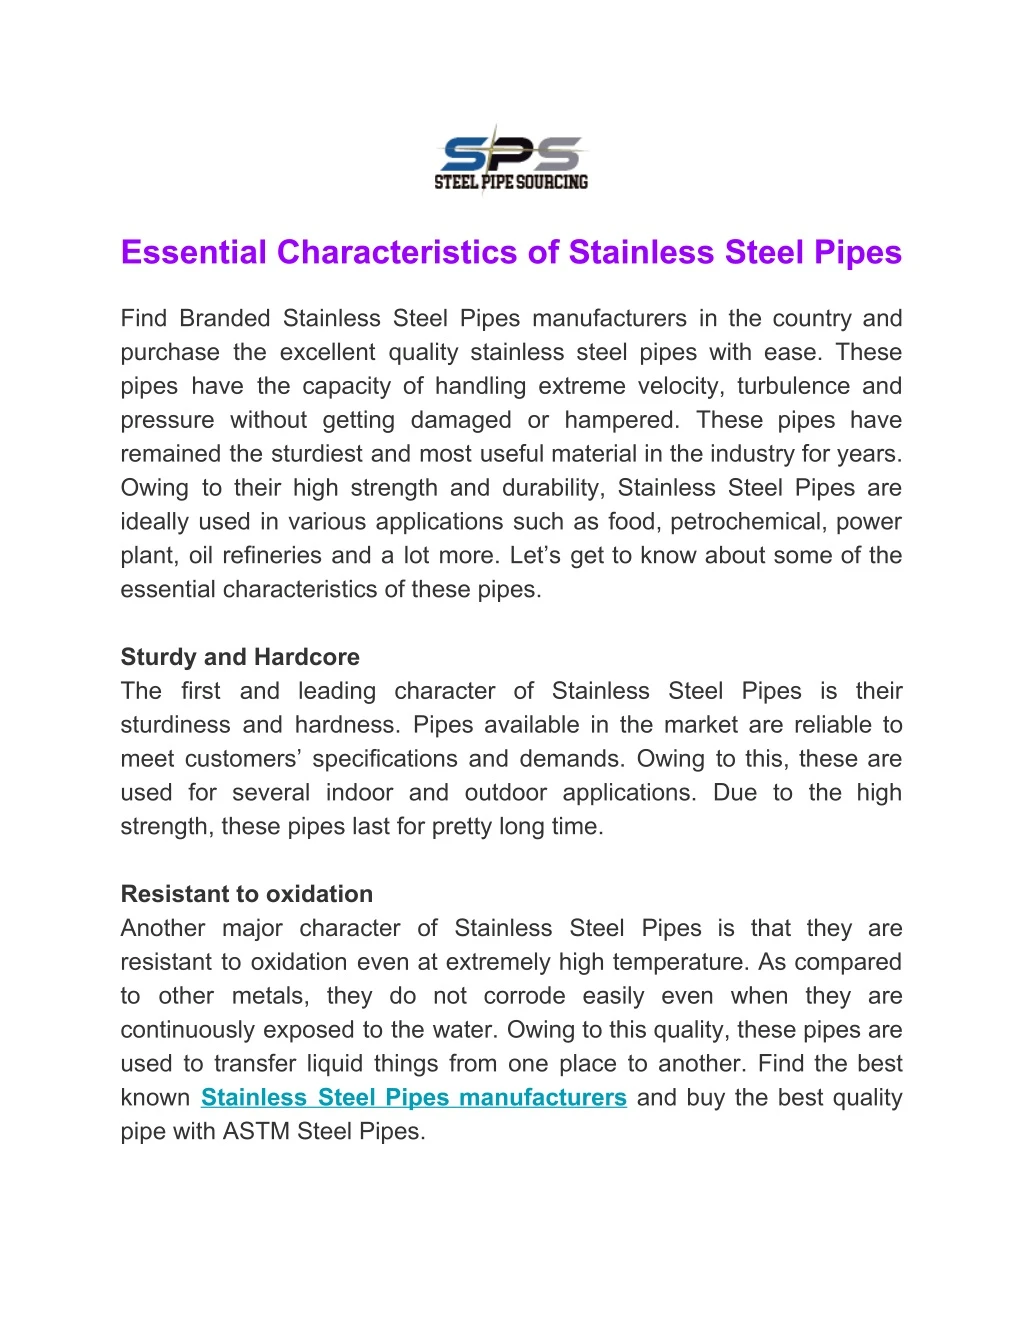 essential characteristics of stainless steel